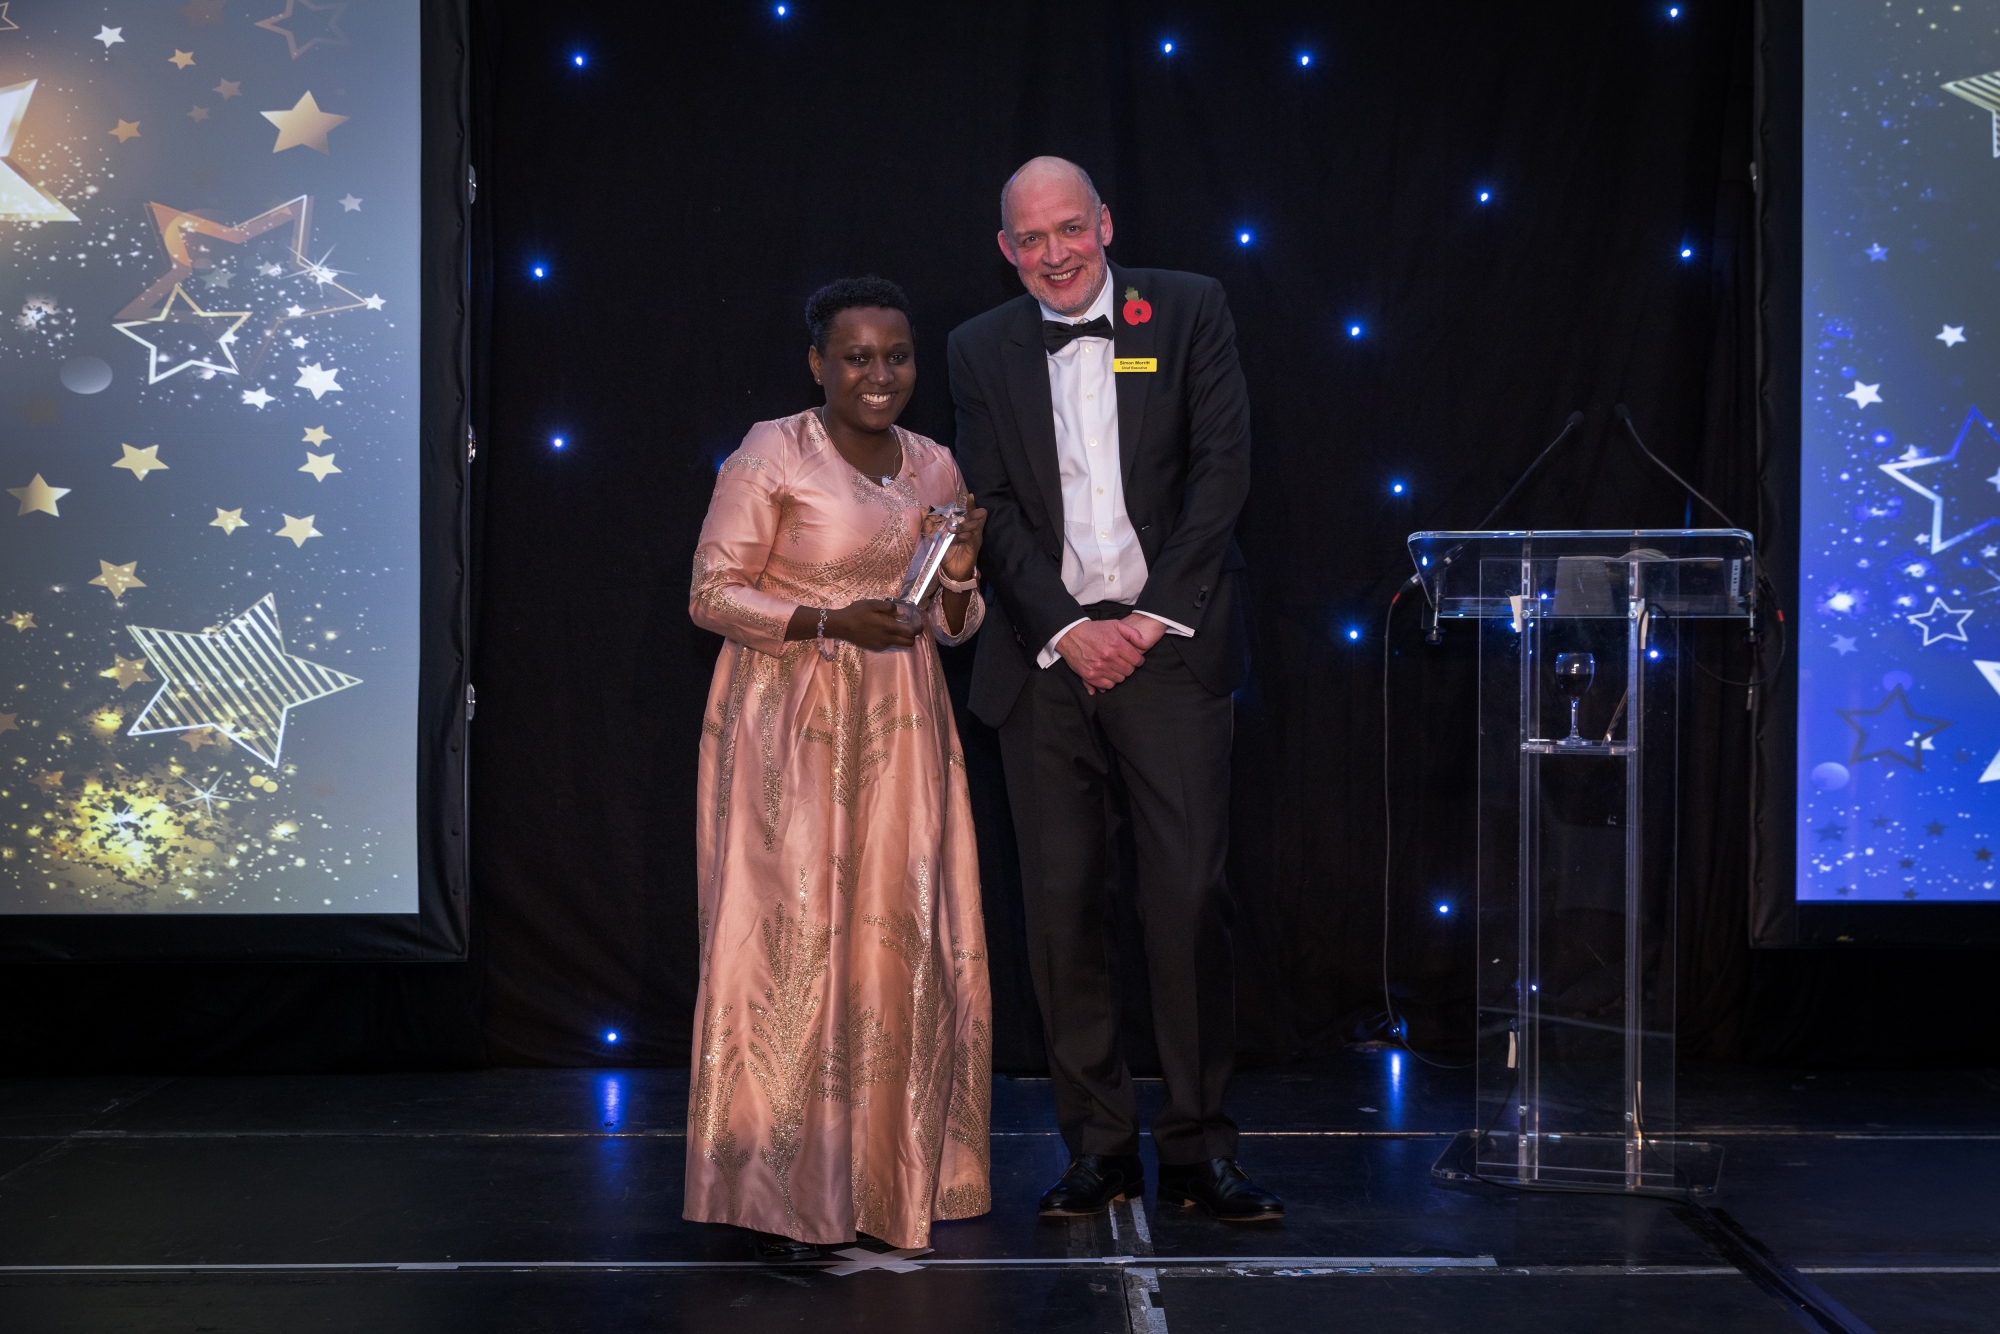 Liz onstage with the Trust's Chief Executive, Simon Morritt, to receive her award.